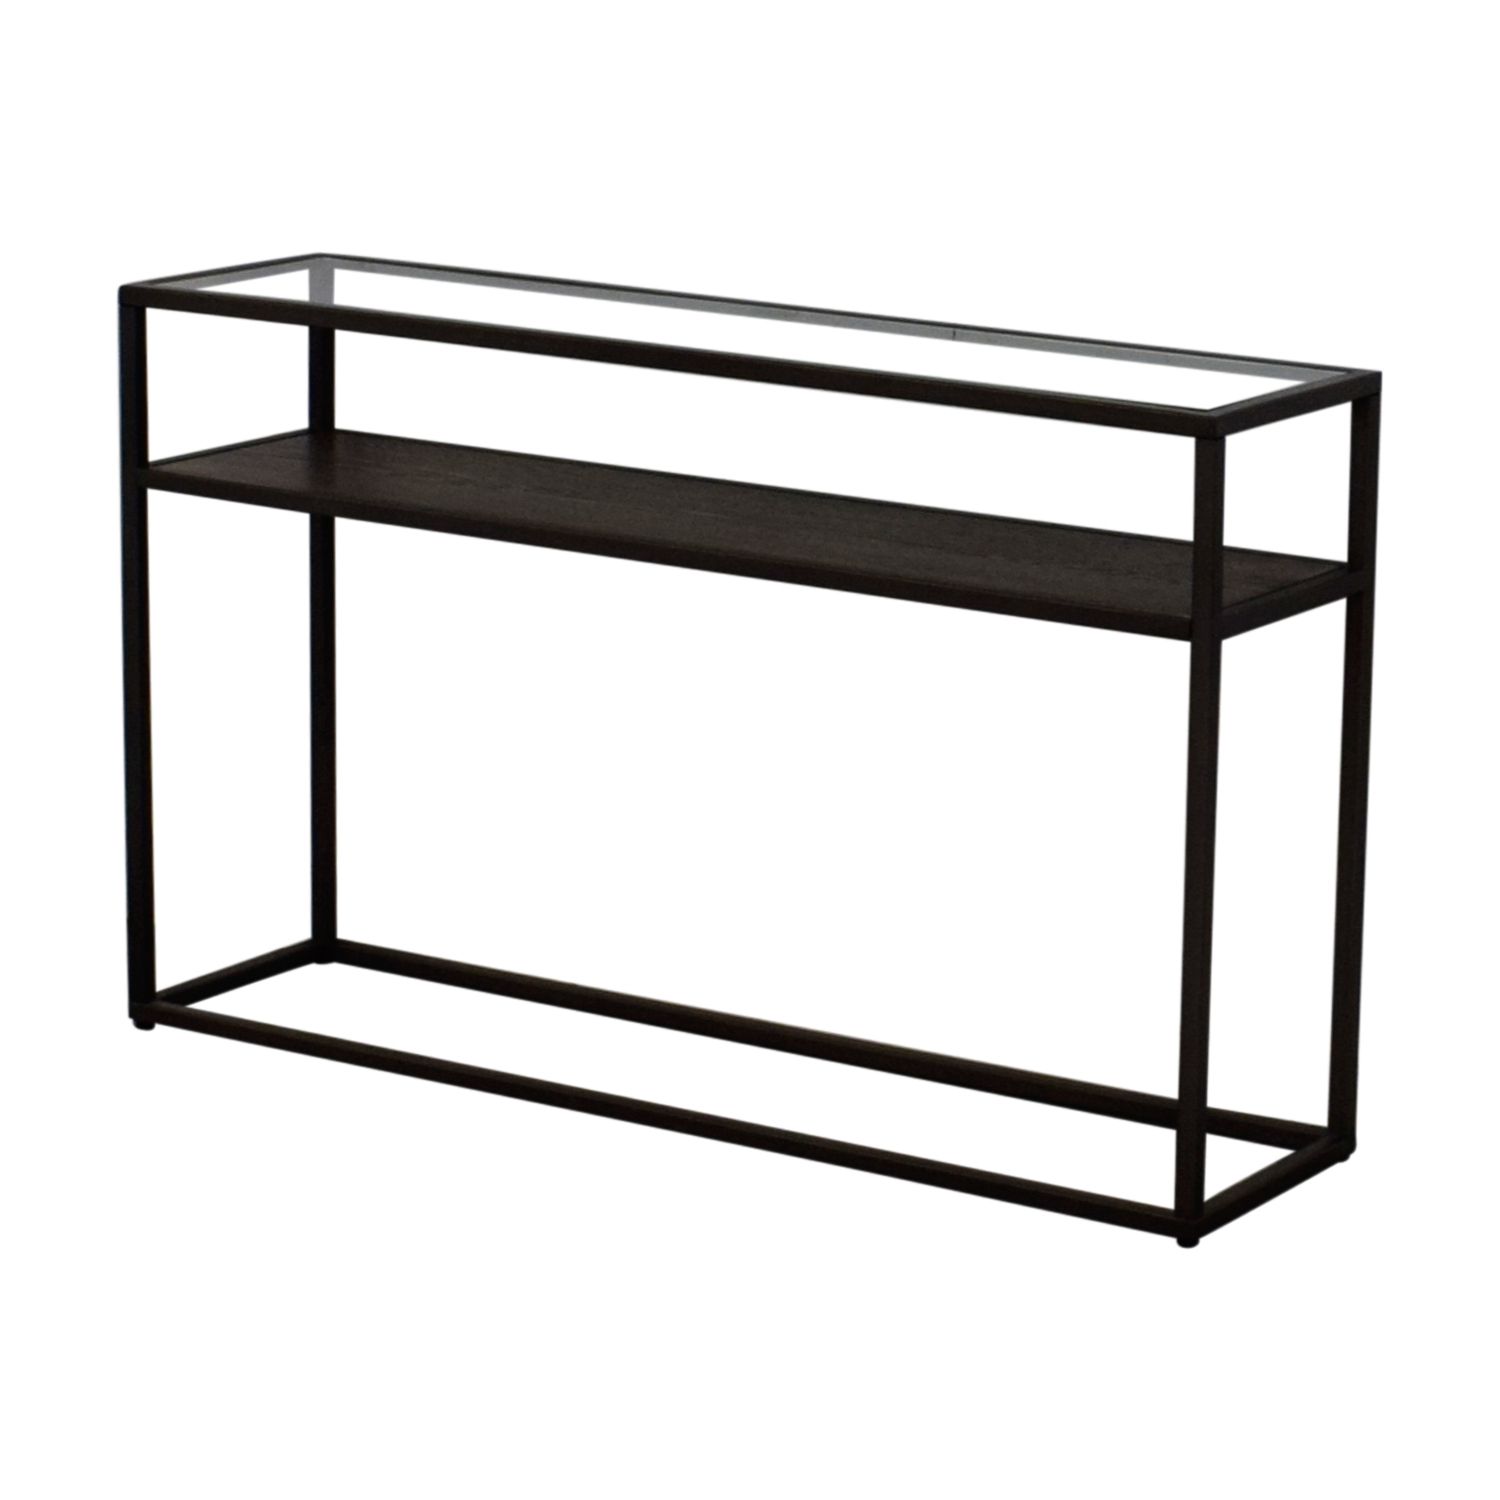 [%79% Off – Crate & Barrel Crate & Barrel Switch Glass Wood And Metal For Newest Switch Console Tables|switch Console Tables With Regard To Newest 79% Off – Crate & Barrel Crate & Barrel Switch Glass Wood And Metal|well Known Switch Console Tables In 79% Off – Crate & Barrel Crate & Barrel Switch Glass Wood And Metal|2018 79% Off – Crate & Barrel Crate & Barrel Switch Glass Wood And Metal Regarding Switch Console Tables%] (View 7 of 20)